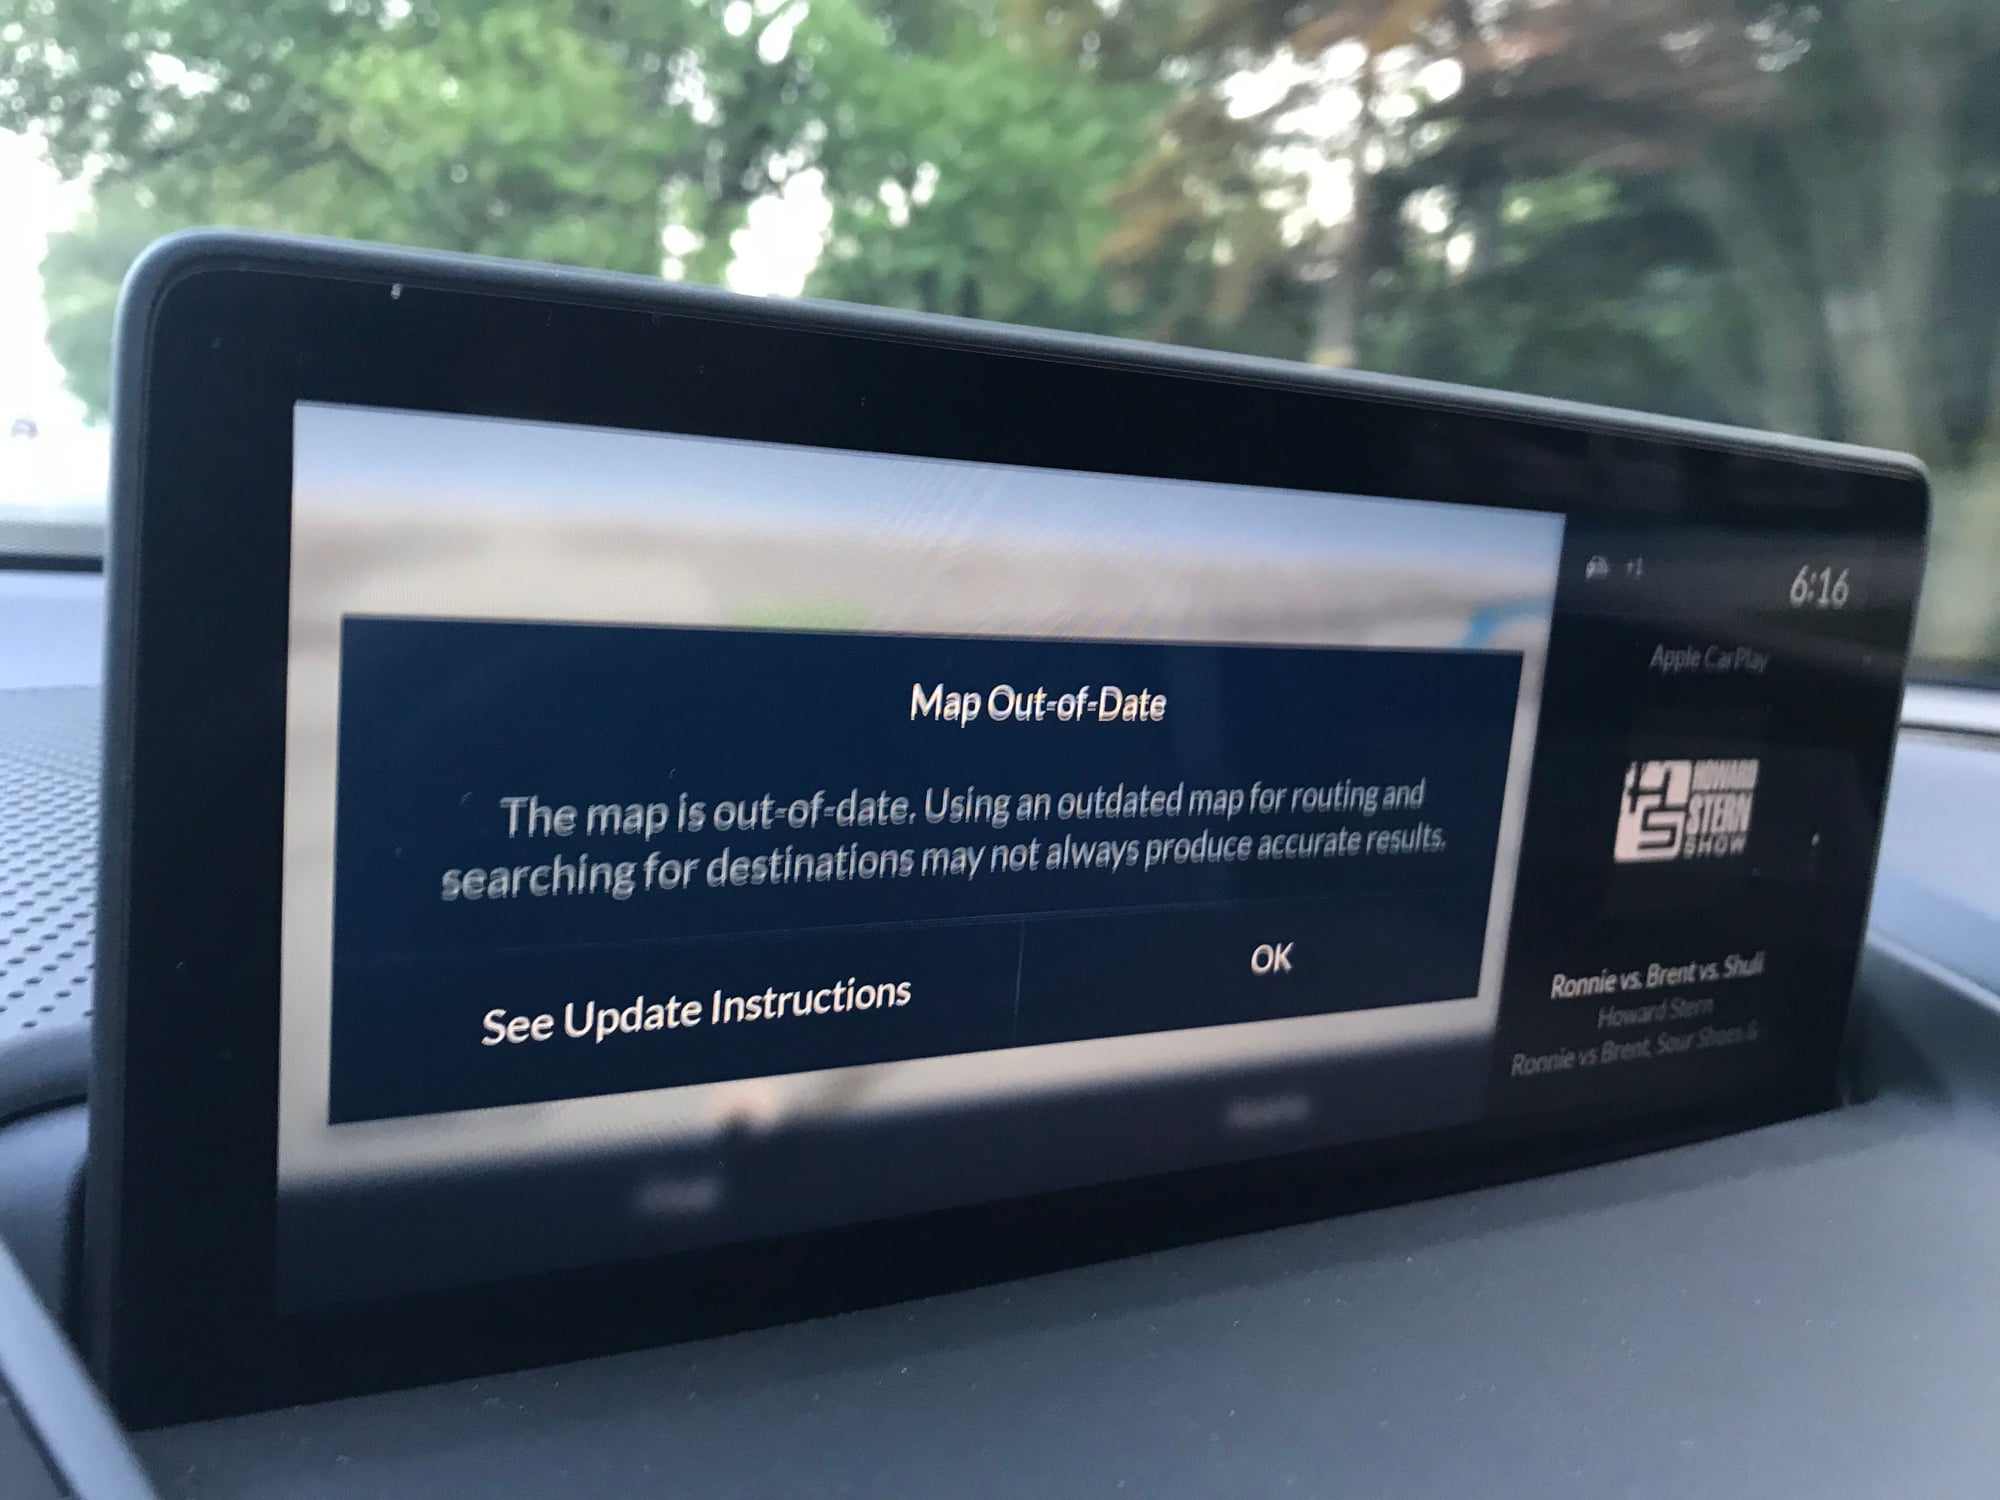 when to install second disk for 2018 acura map update